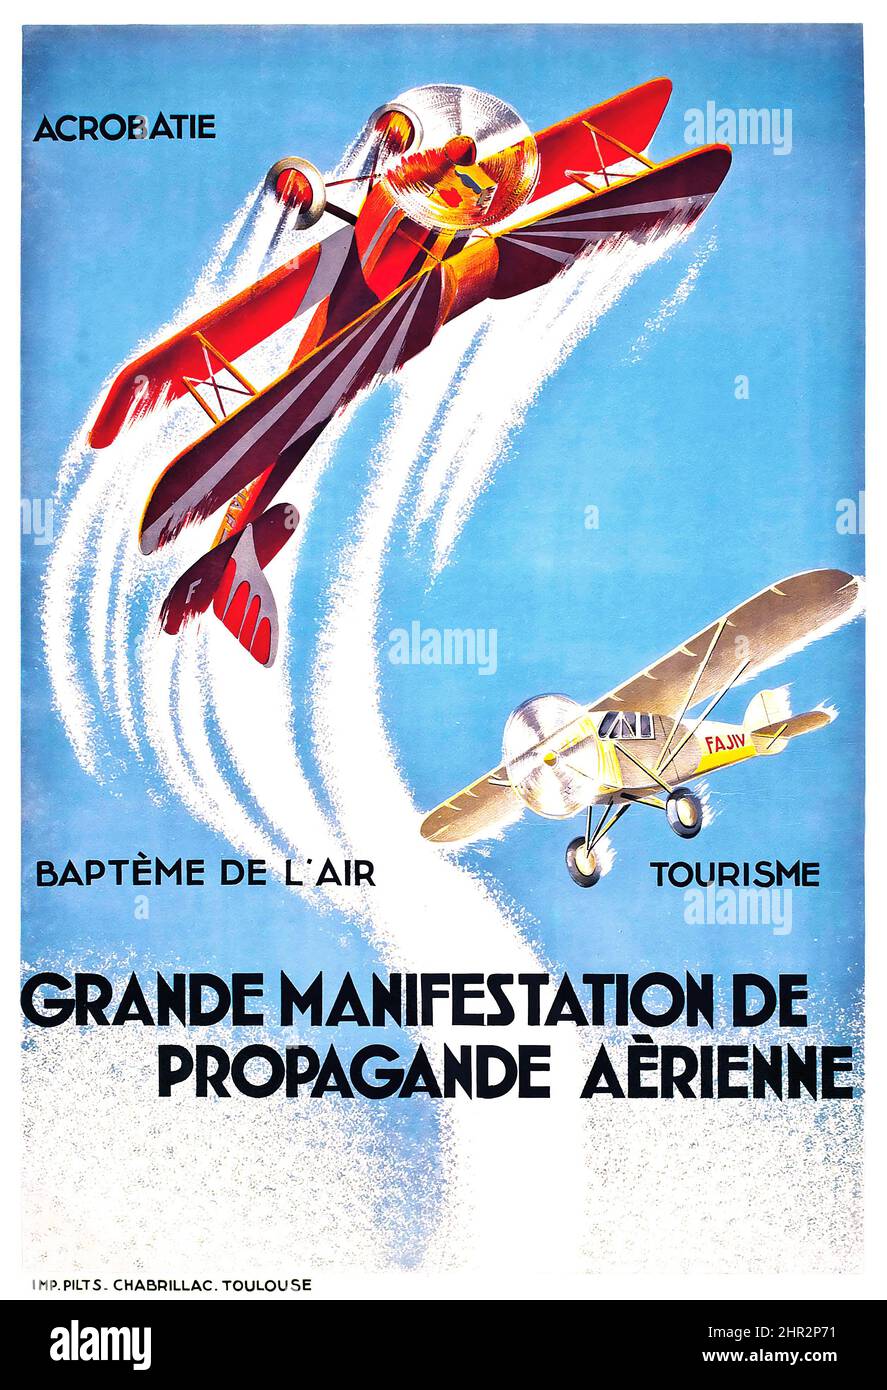 Anonymous artist - GRANDE MANIFESTATION DE PROPAGANDE AERIENNE, c.1920, printed by Chabrillac, Toulouse. Aviation show poster. Stock Photo